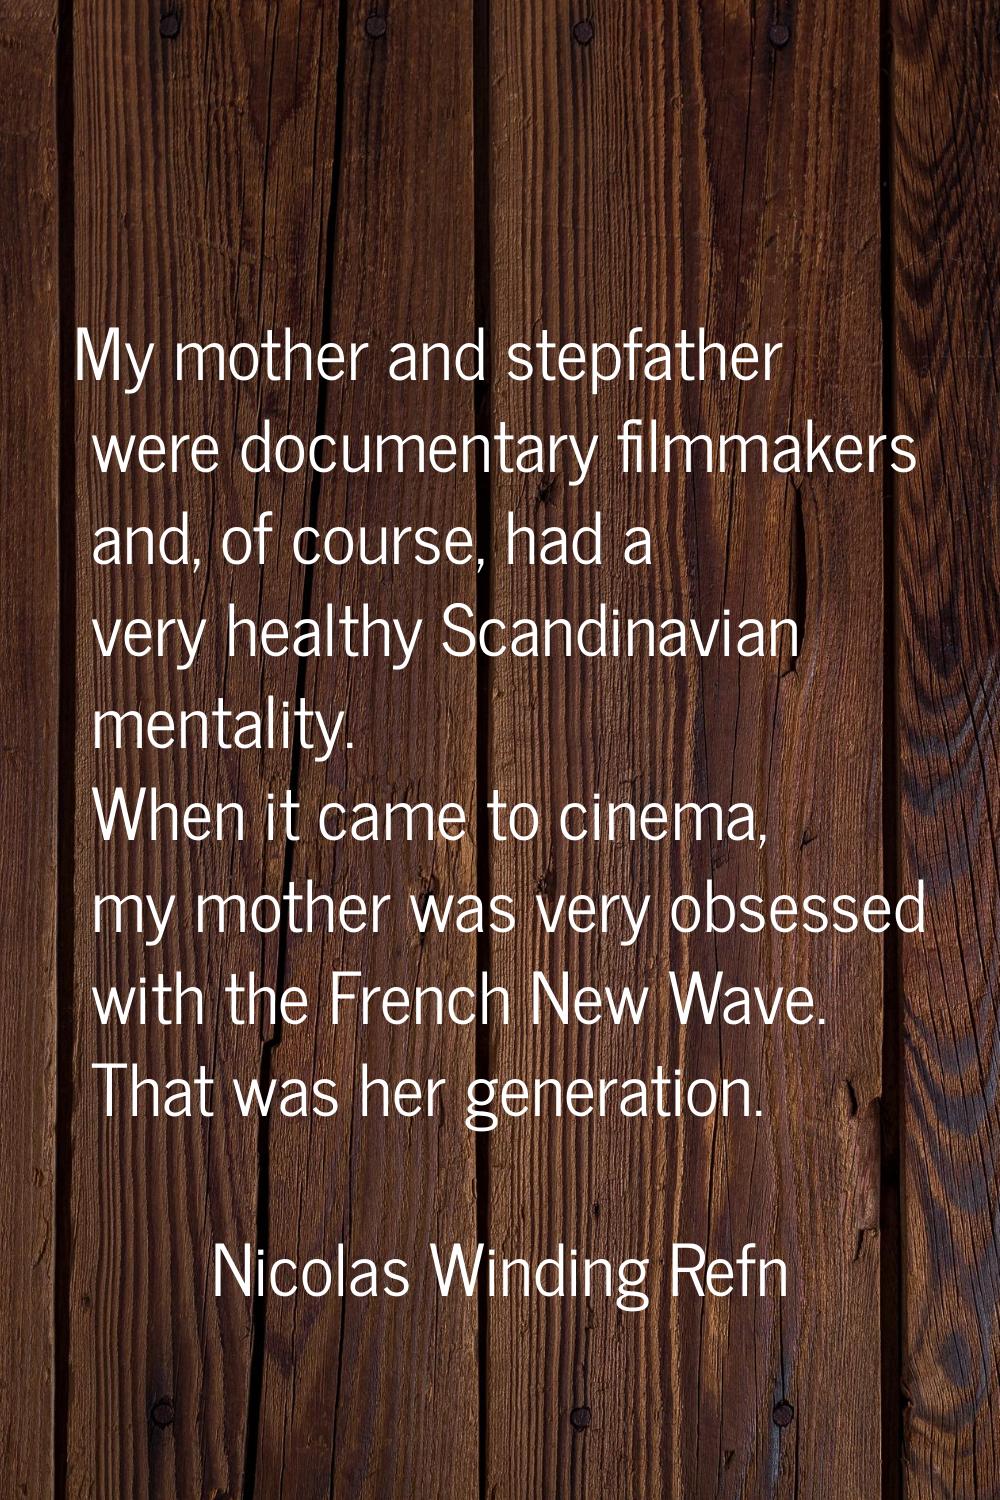 My mother and stepfather were documentary filmmakers and, of course, had a very healthy Scandinavia